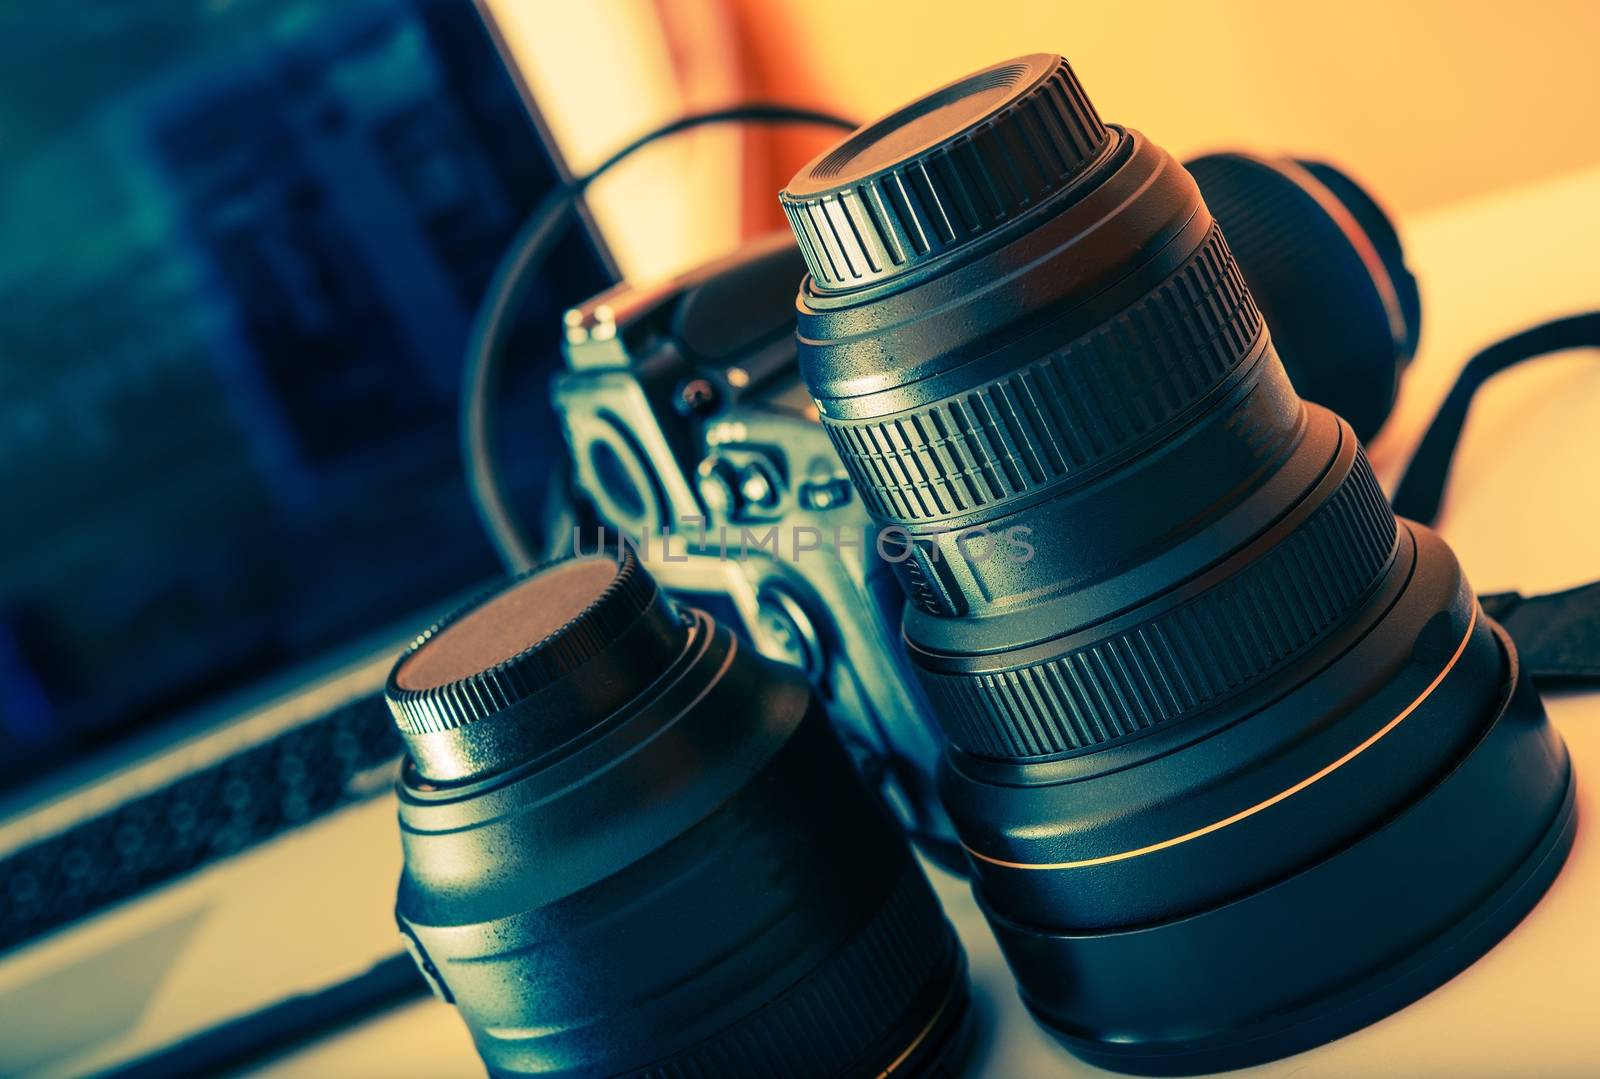 Professional Digital Photograpy Equipment on a Desk. Photography Lenses, Digital Camera and Laptop Computer.